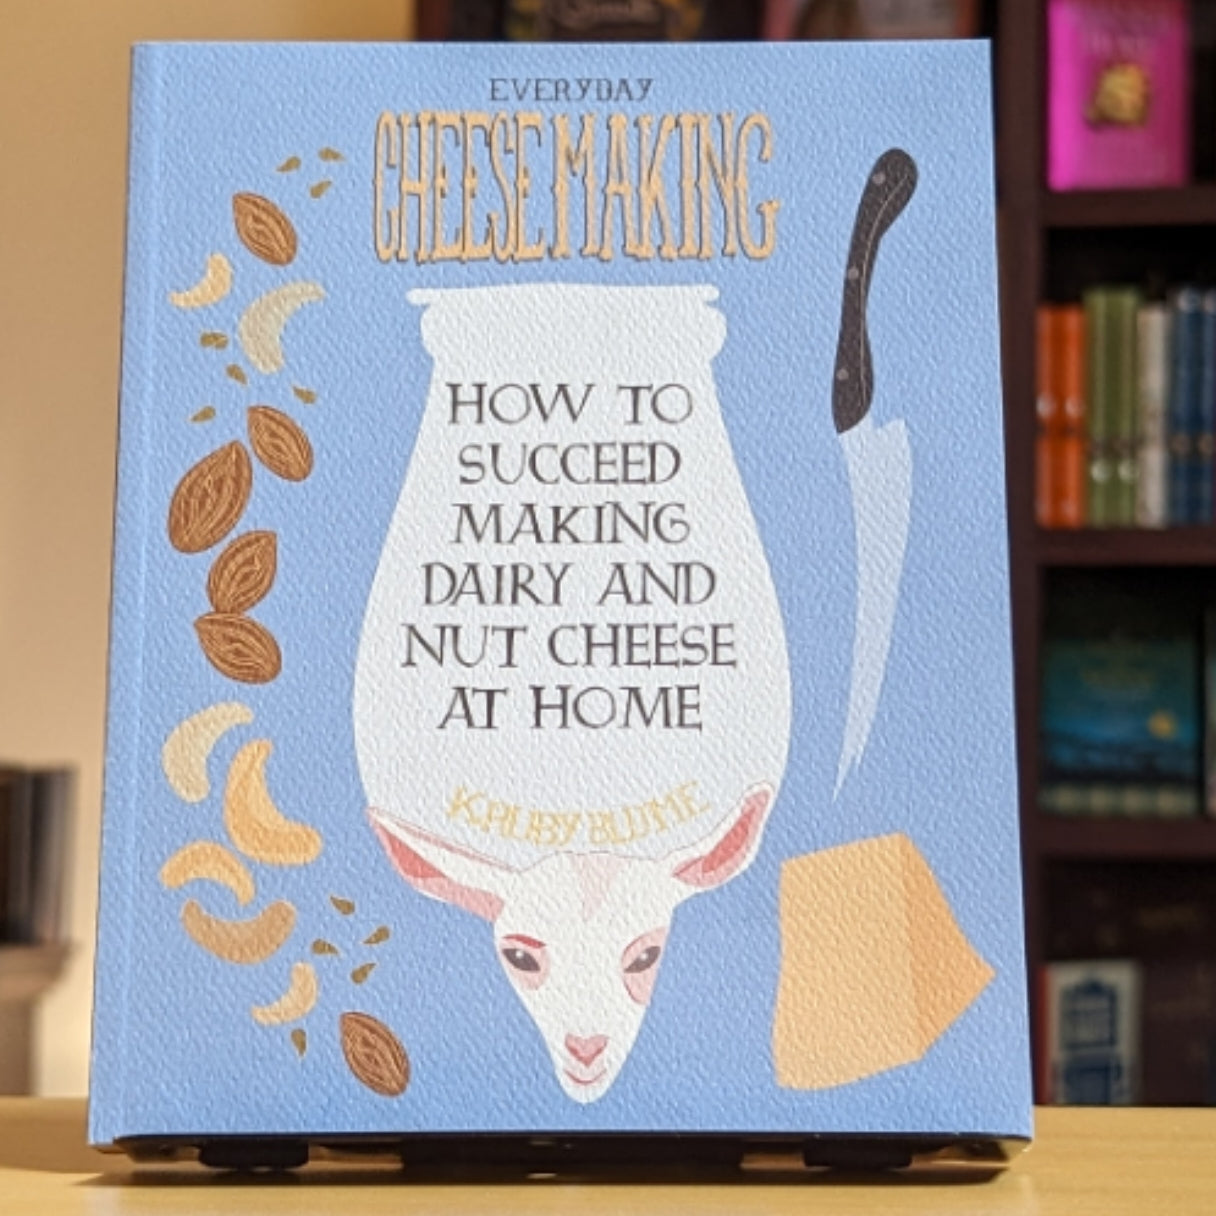 Everyday Cheesemaking: How to Succeed at Making Dairy and Nut Cheese at Home (DIY)